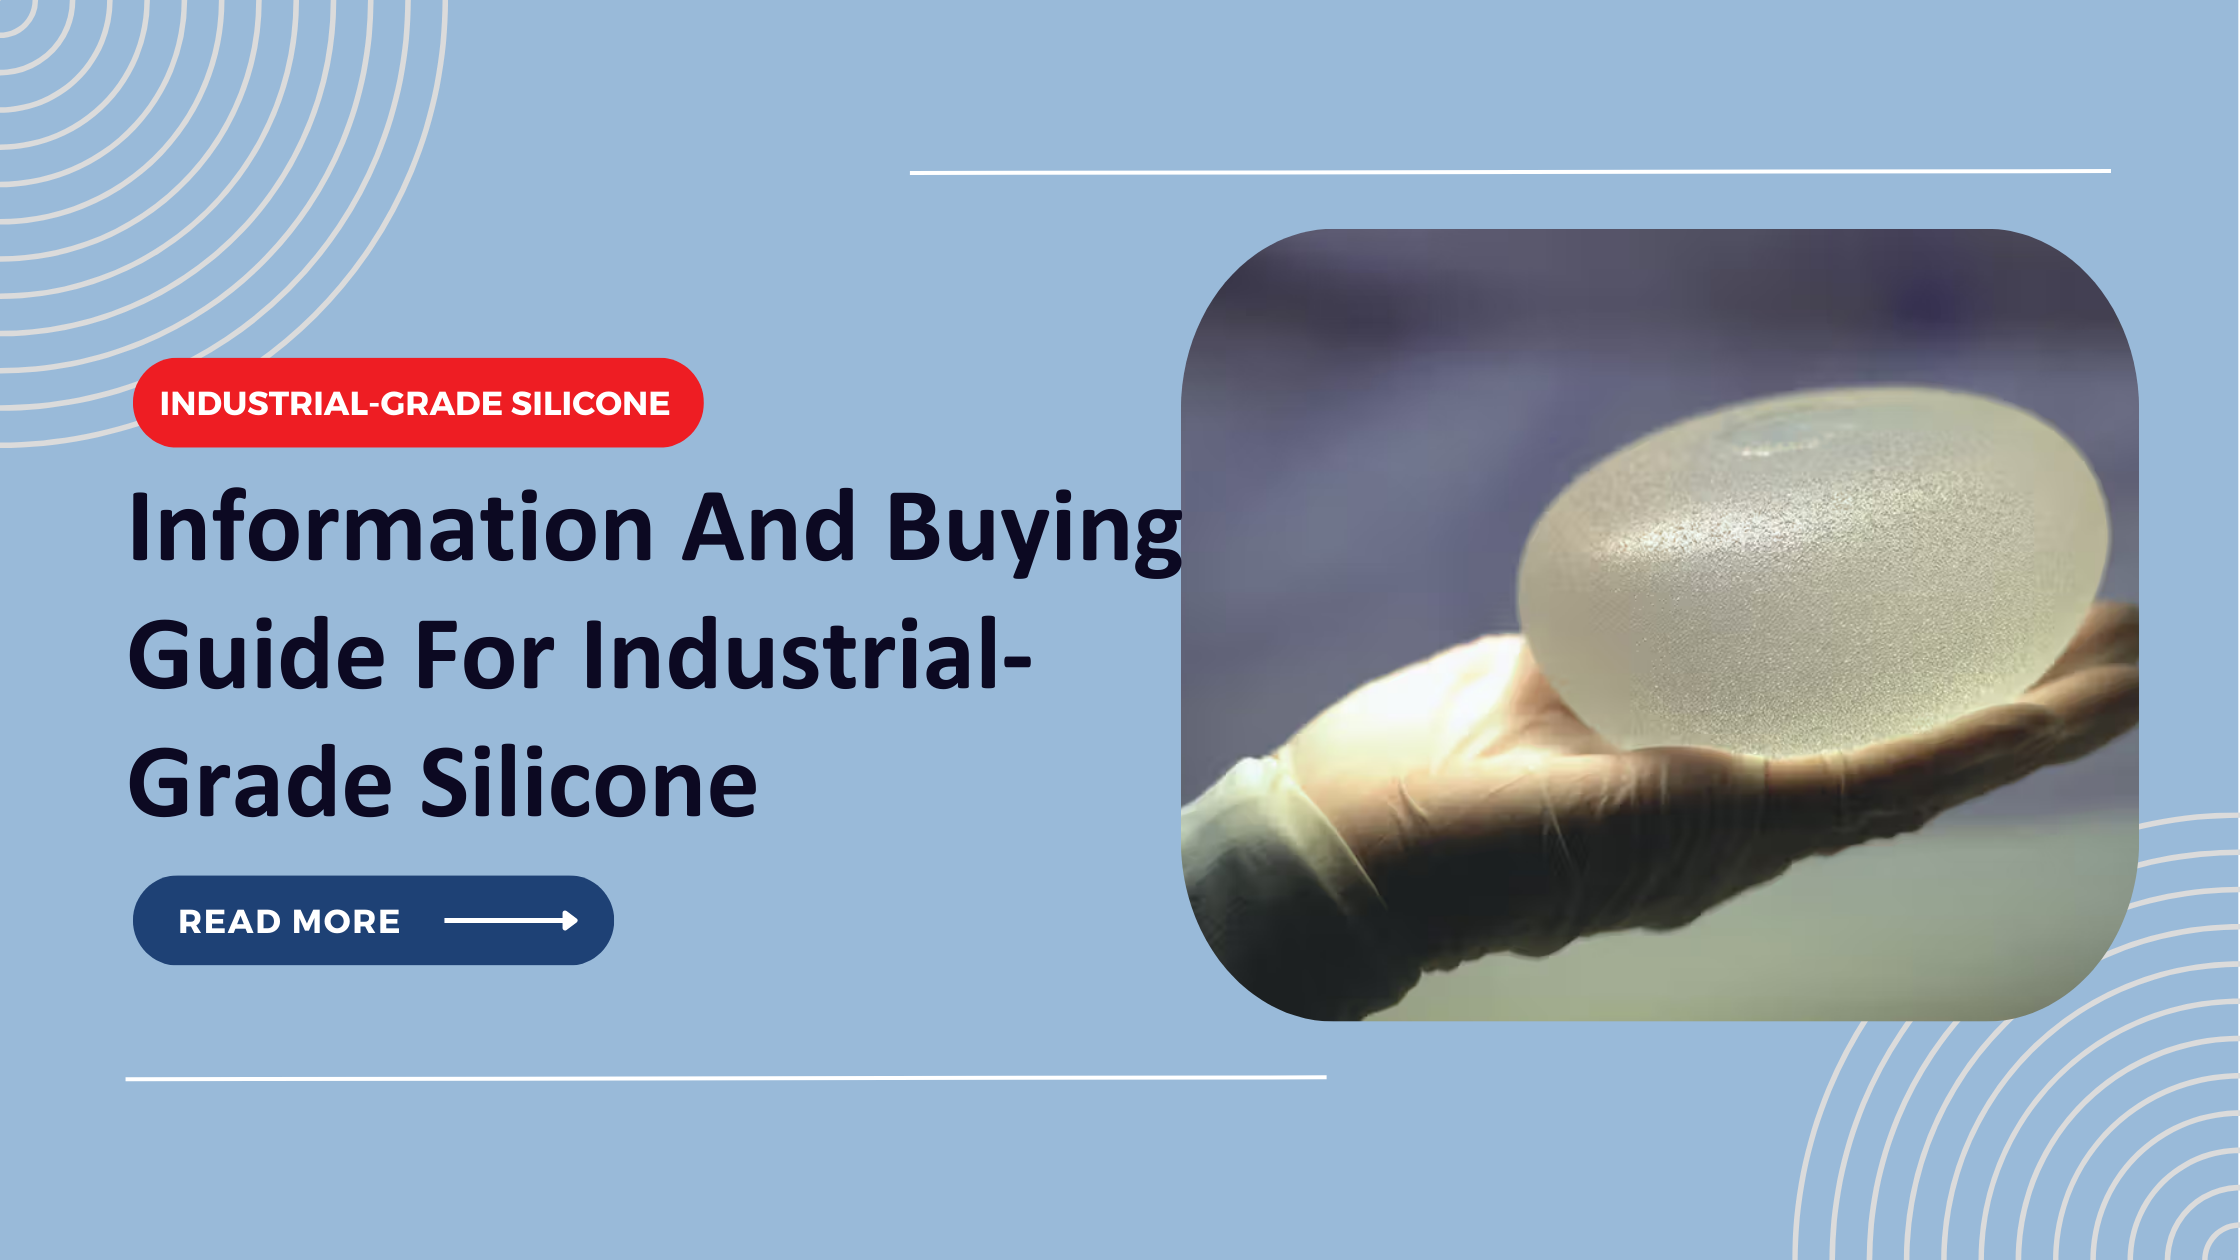 Information And Buying Guide For Industrial-Grade Silicone